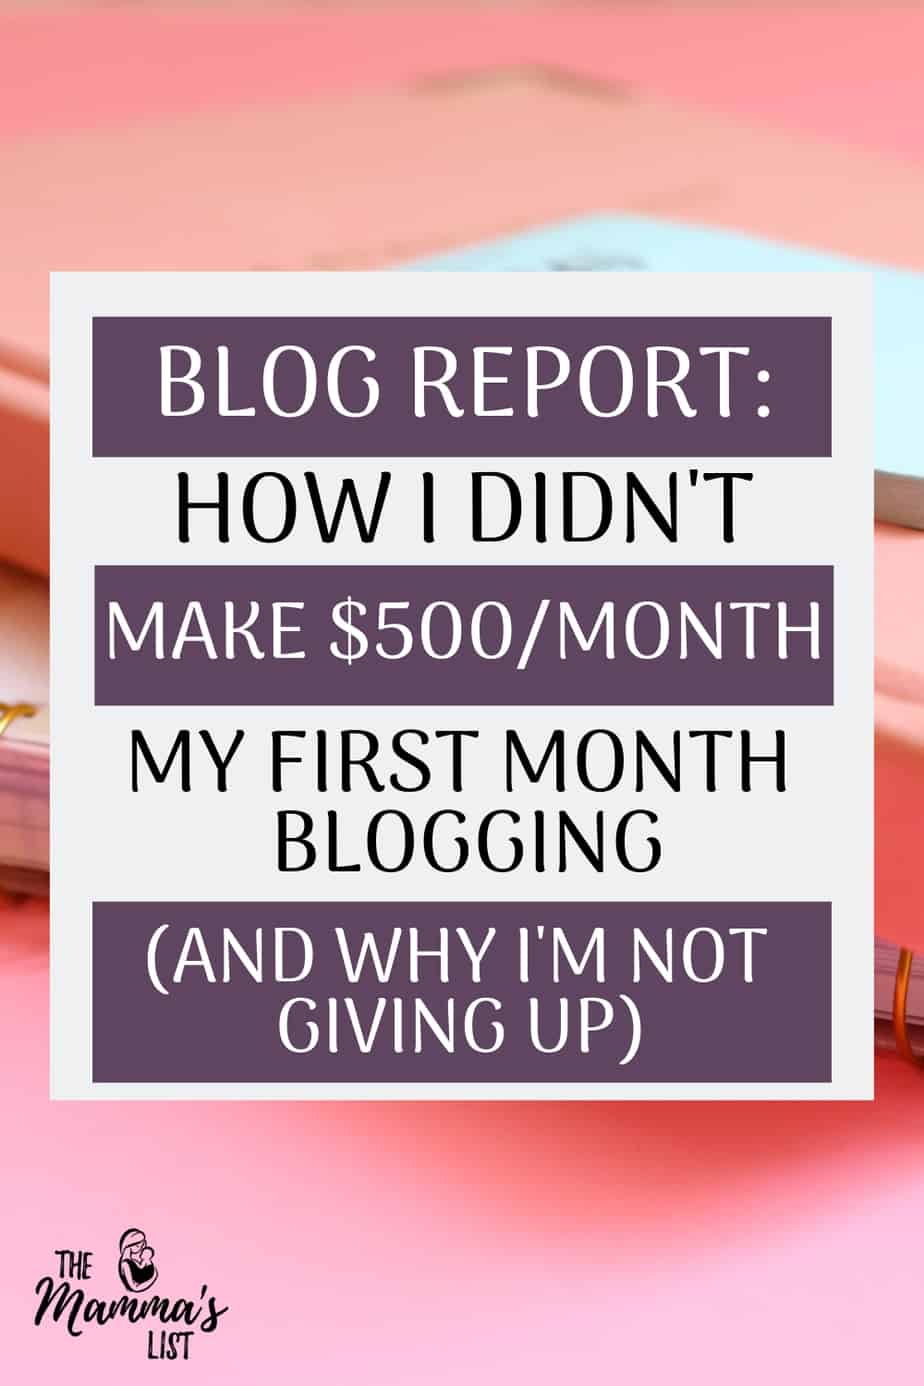 Blogging for profit is a long game. Don't be discouraged if you don't make money out of the gate. I didn't make money my first six months, but I'm not giving up, and you shouldn't either!